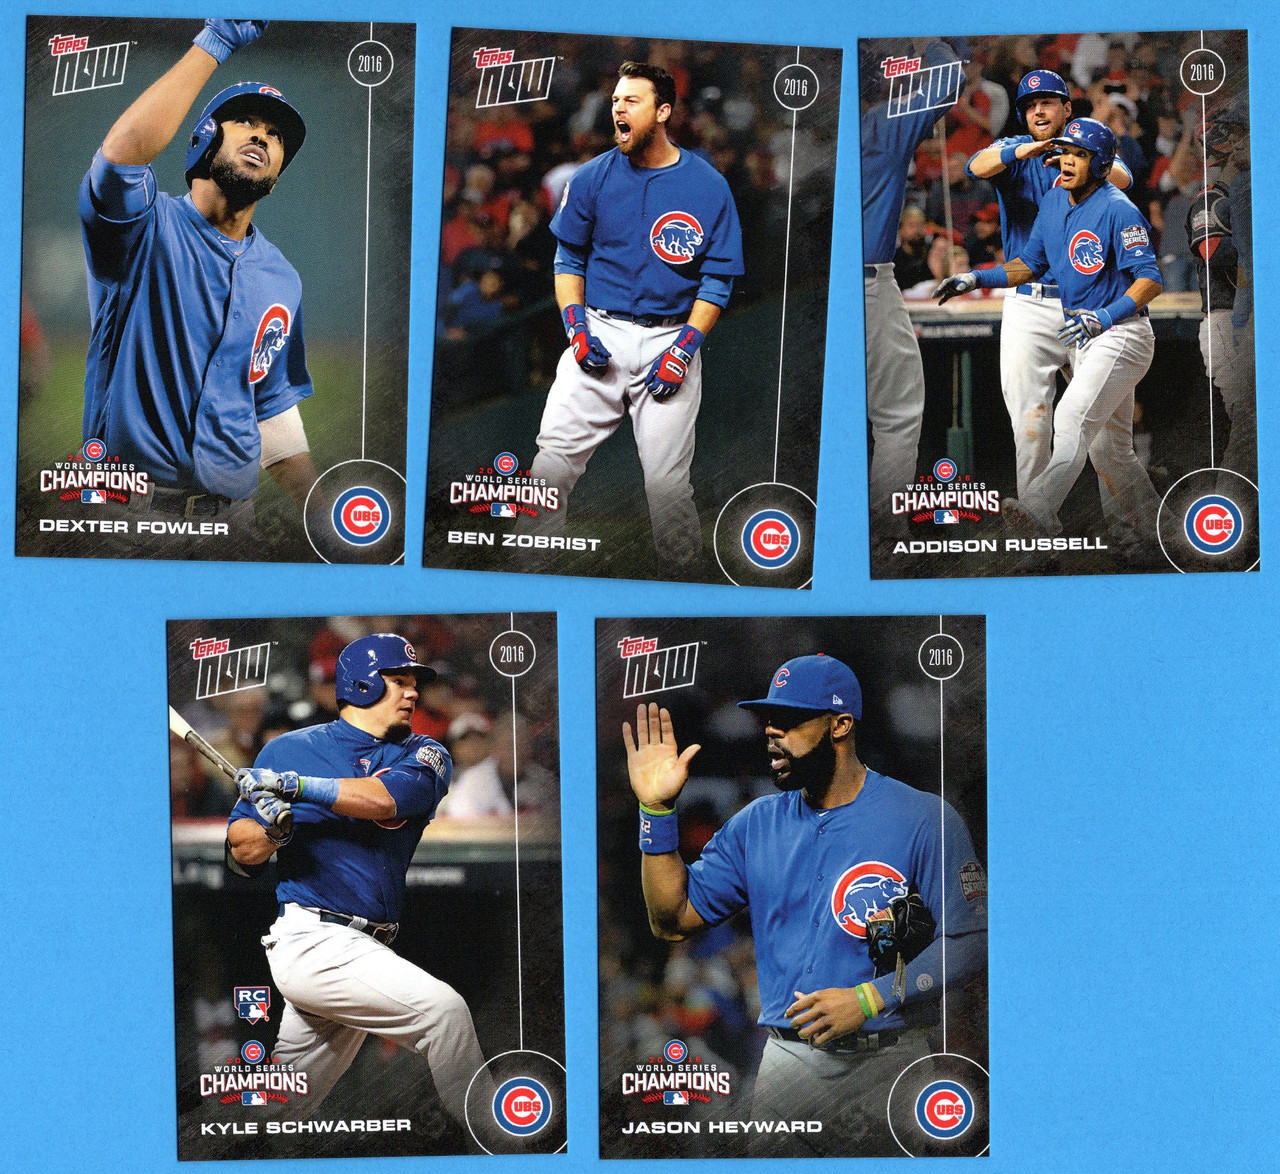 Chicago Cubs / 2022 Topps Baseball Team Set (Series 1 and 2) with